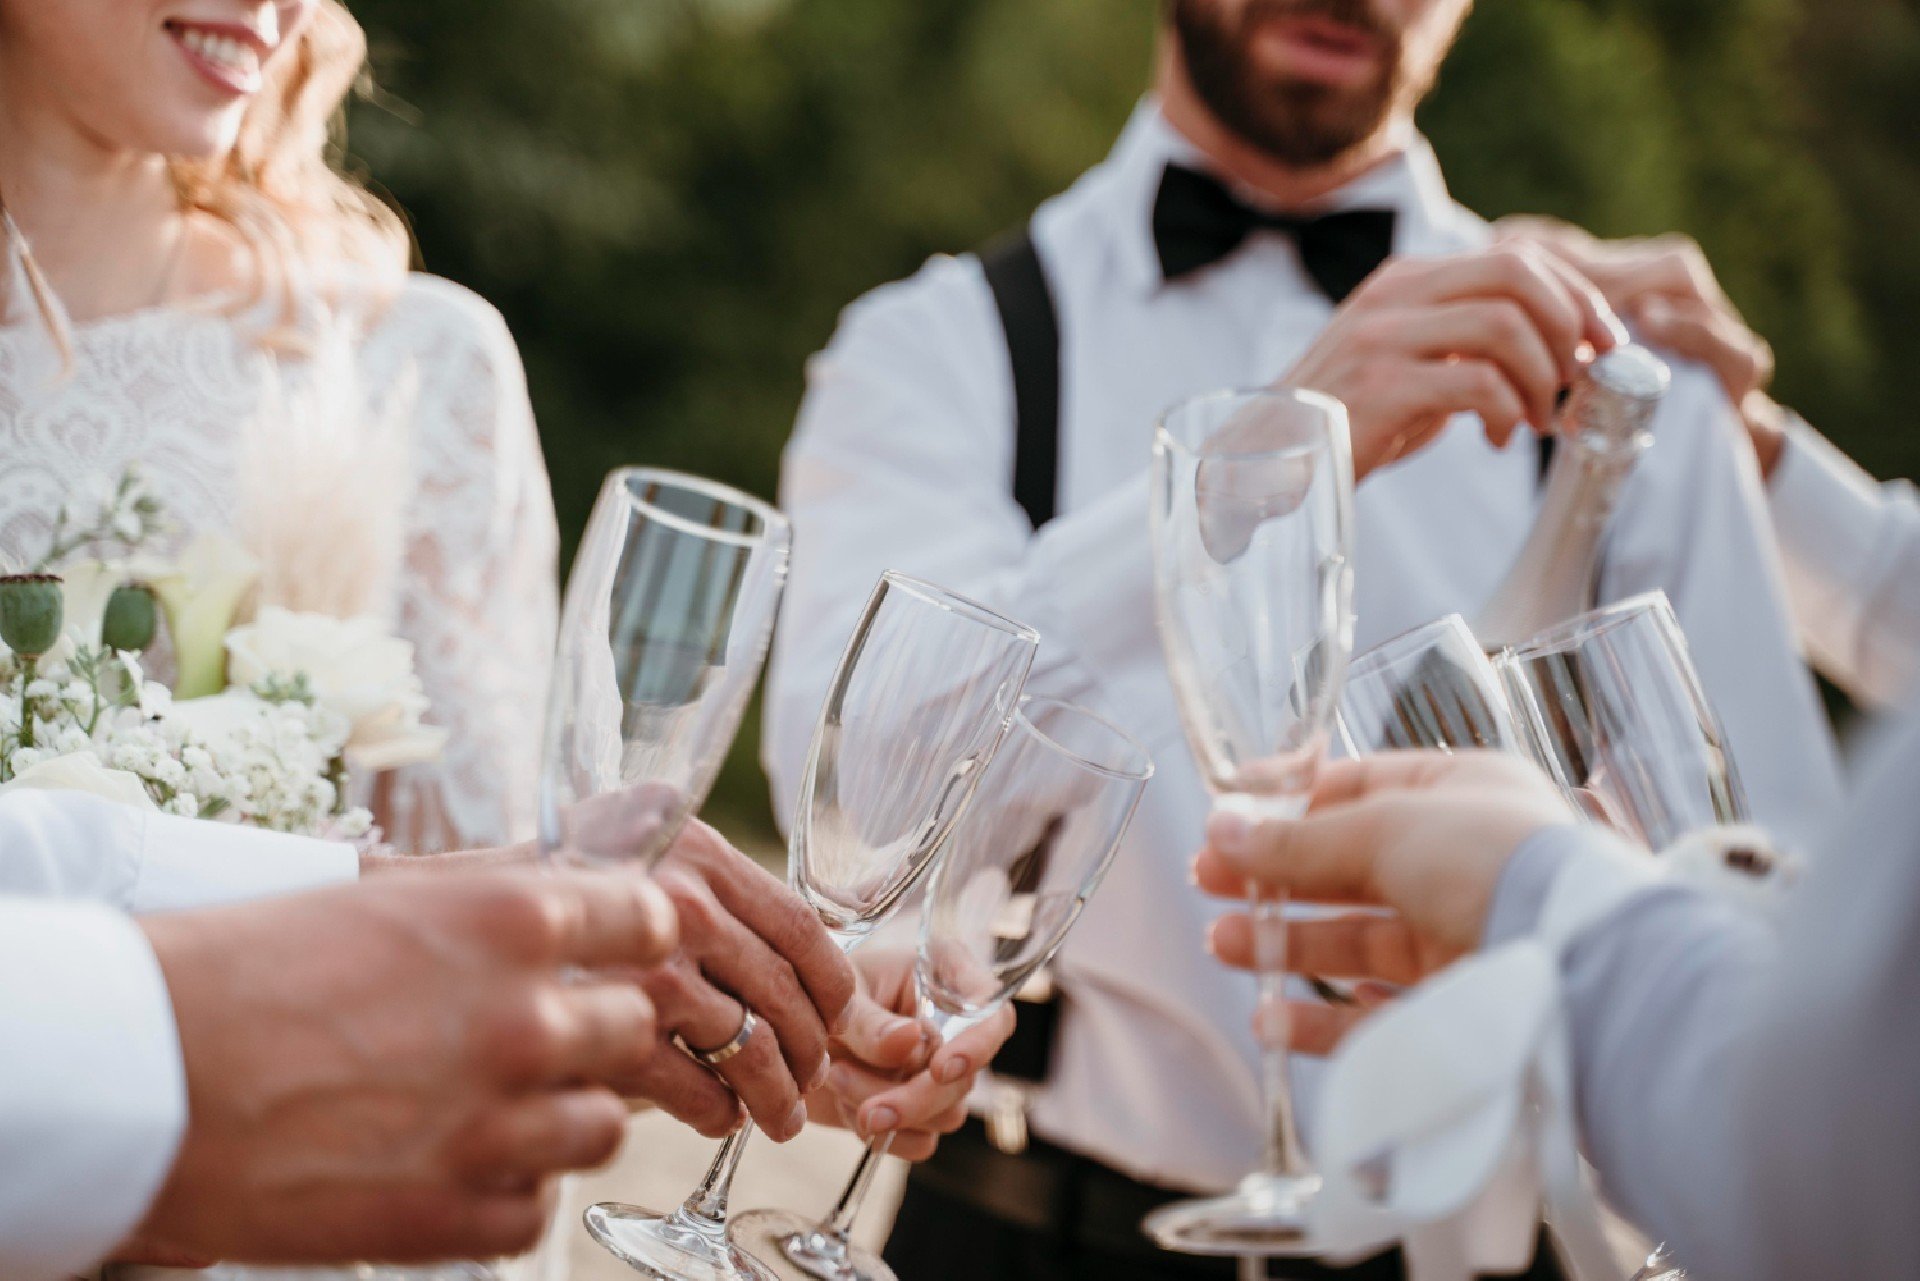 Wedding Party Songs - The Ultimate Playlist To Cater To Everyone's Taste